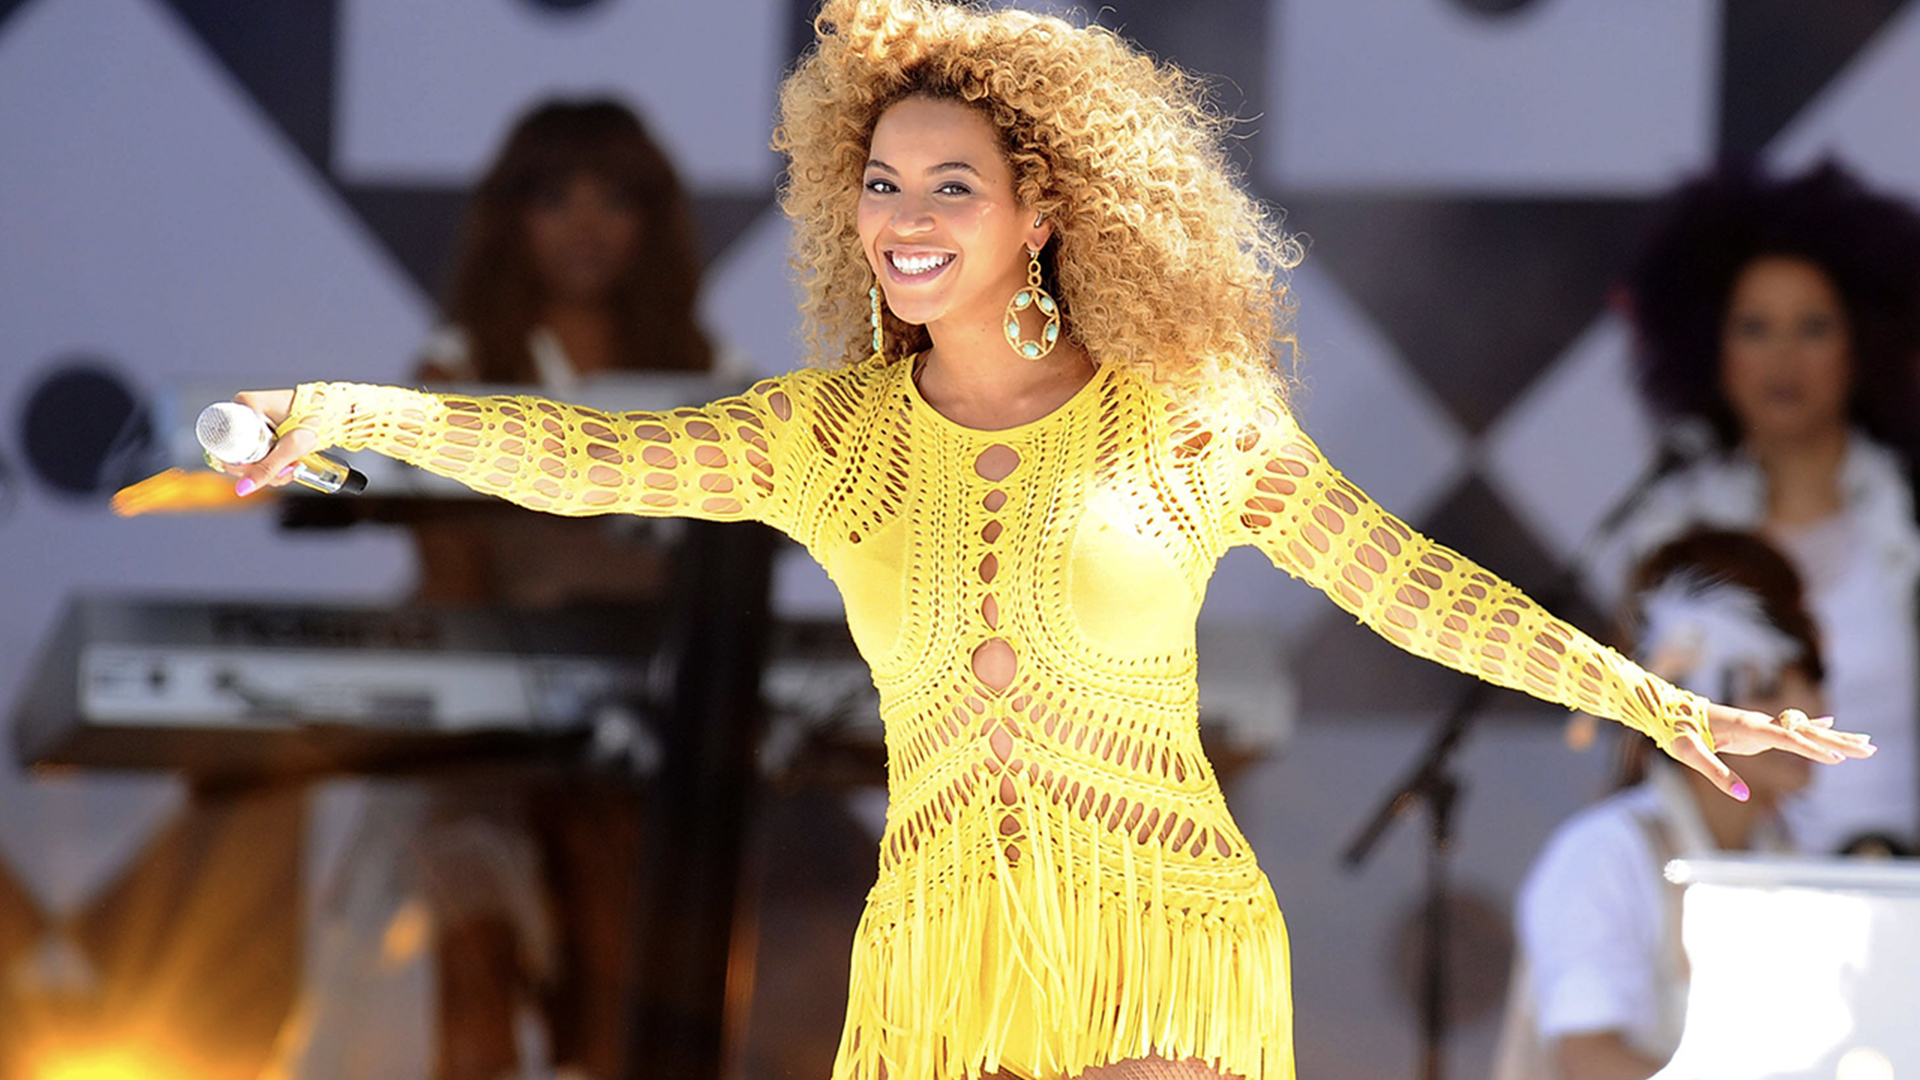 Beyonce wearing a yellow dress on stage with her microphone in her hand